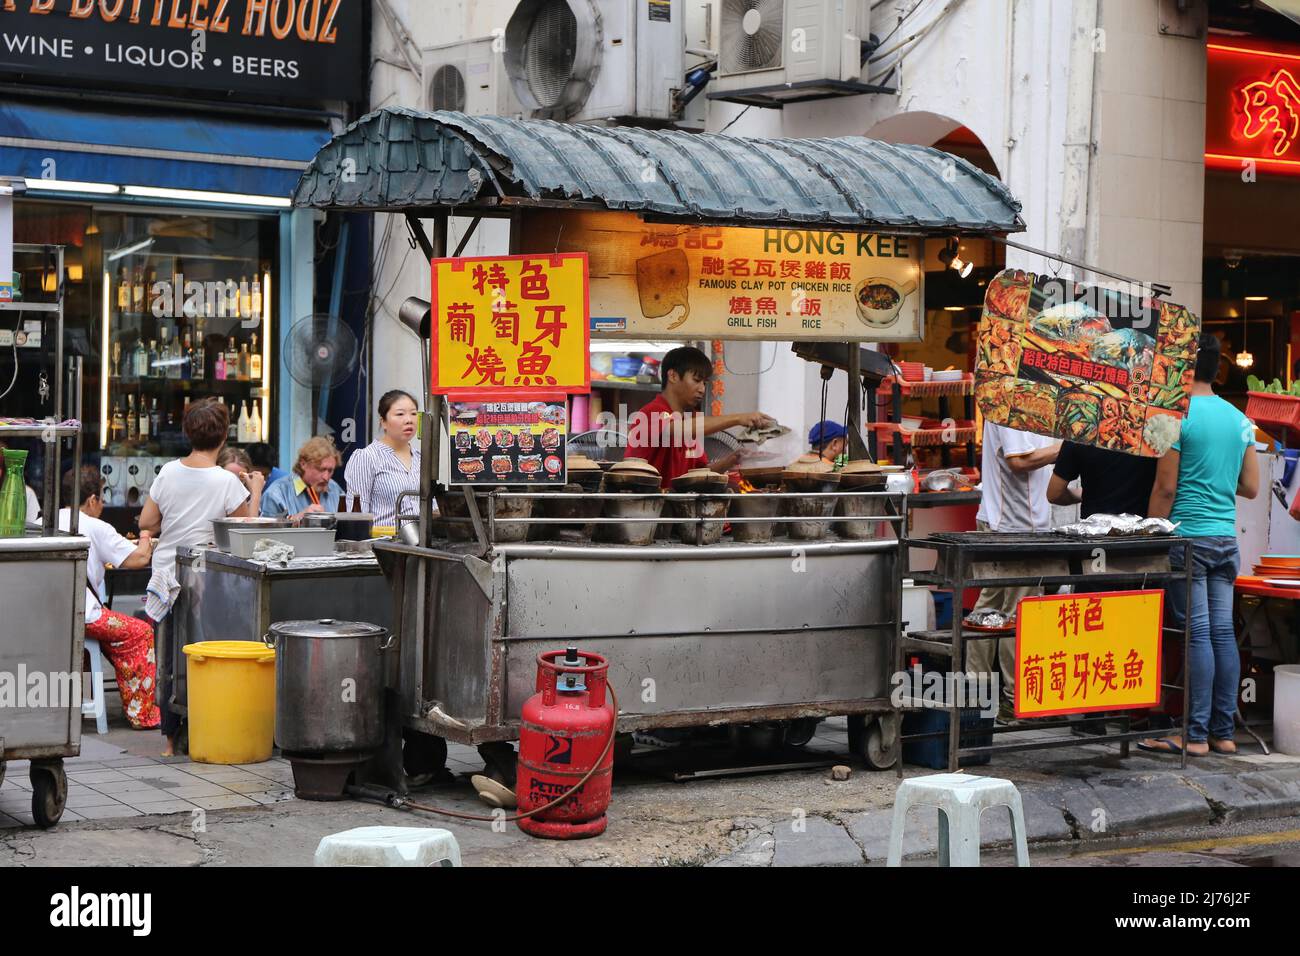 streetfood picture Stock Photo